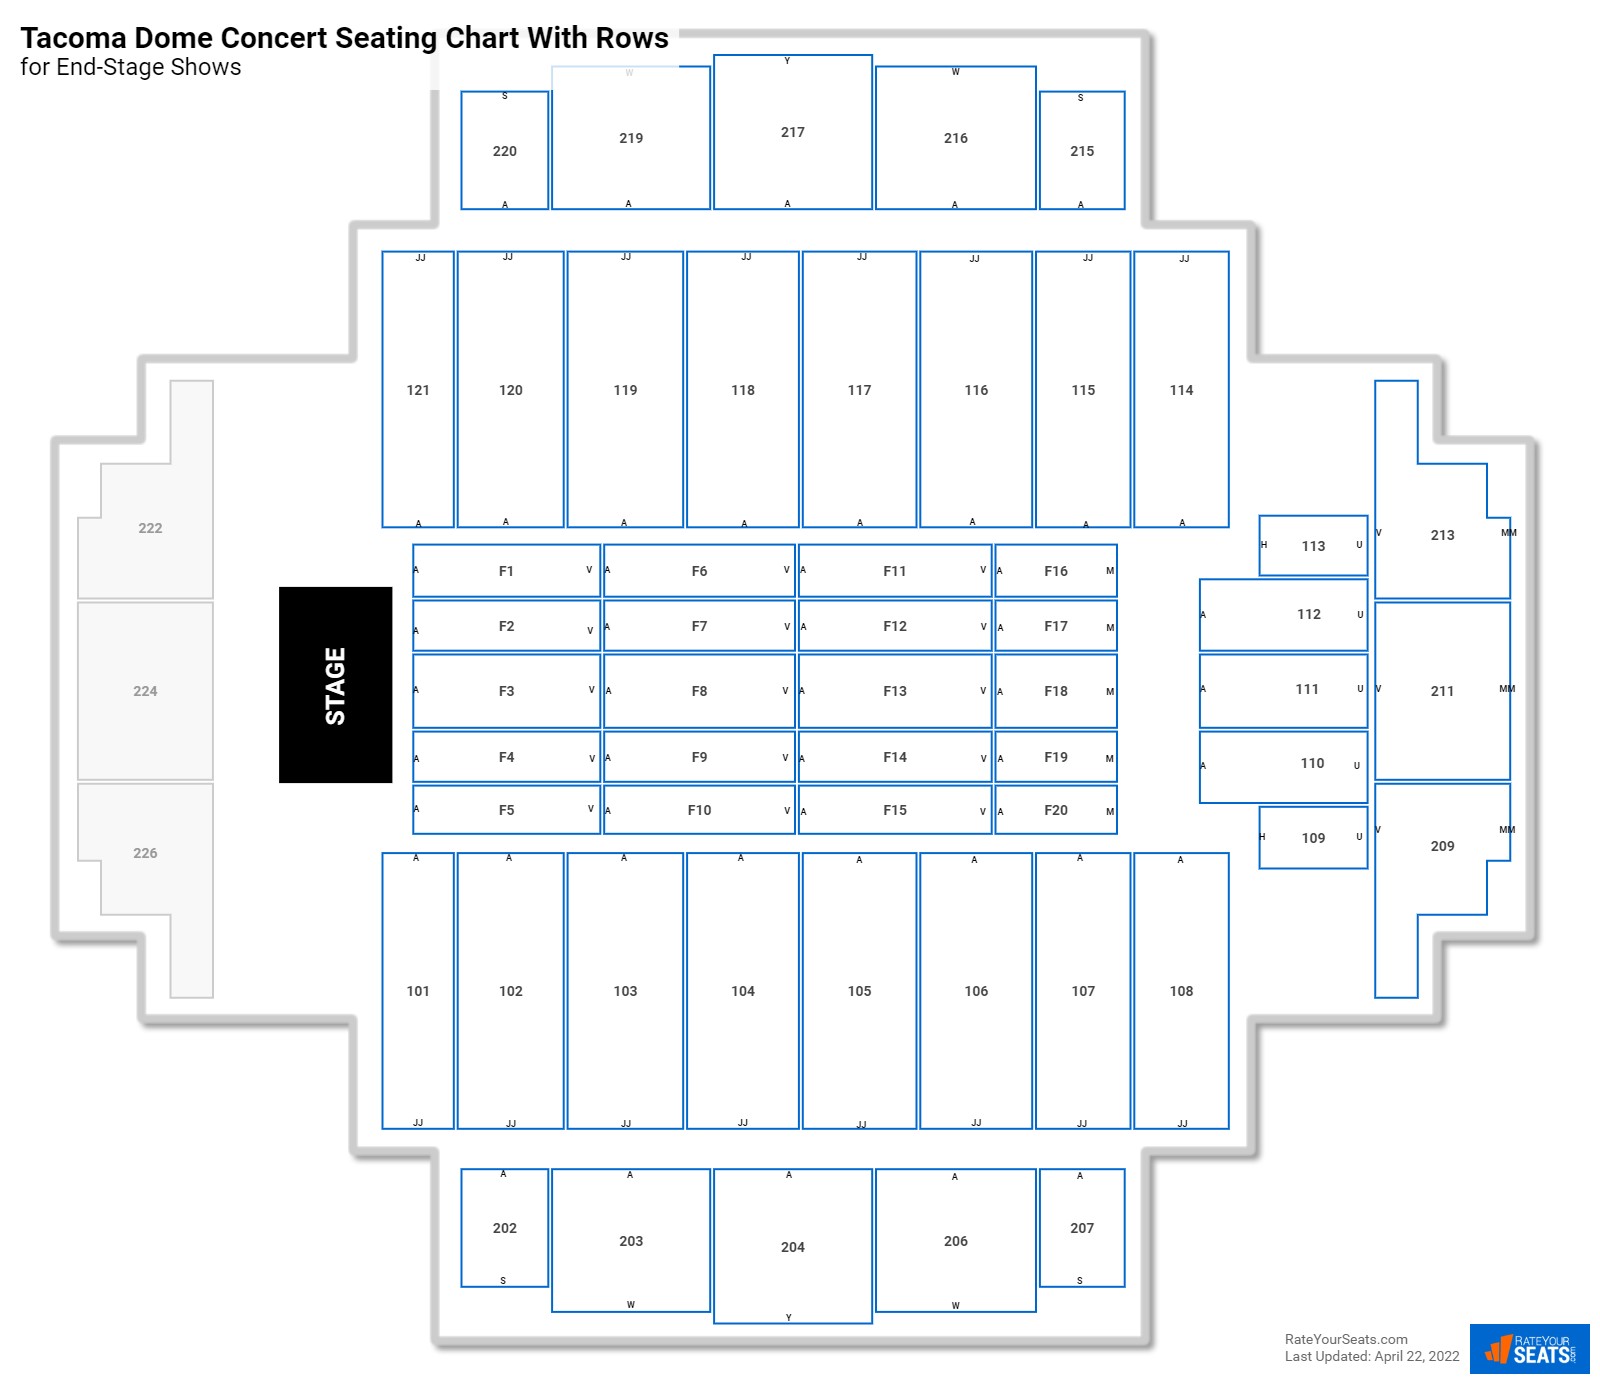 Tacoma Dome seating chart with row numbers